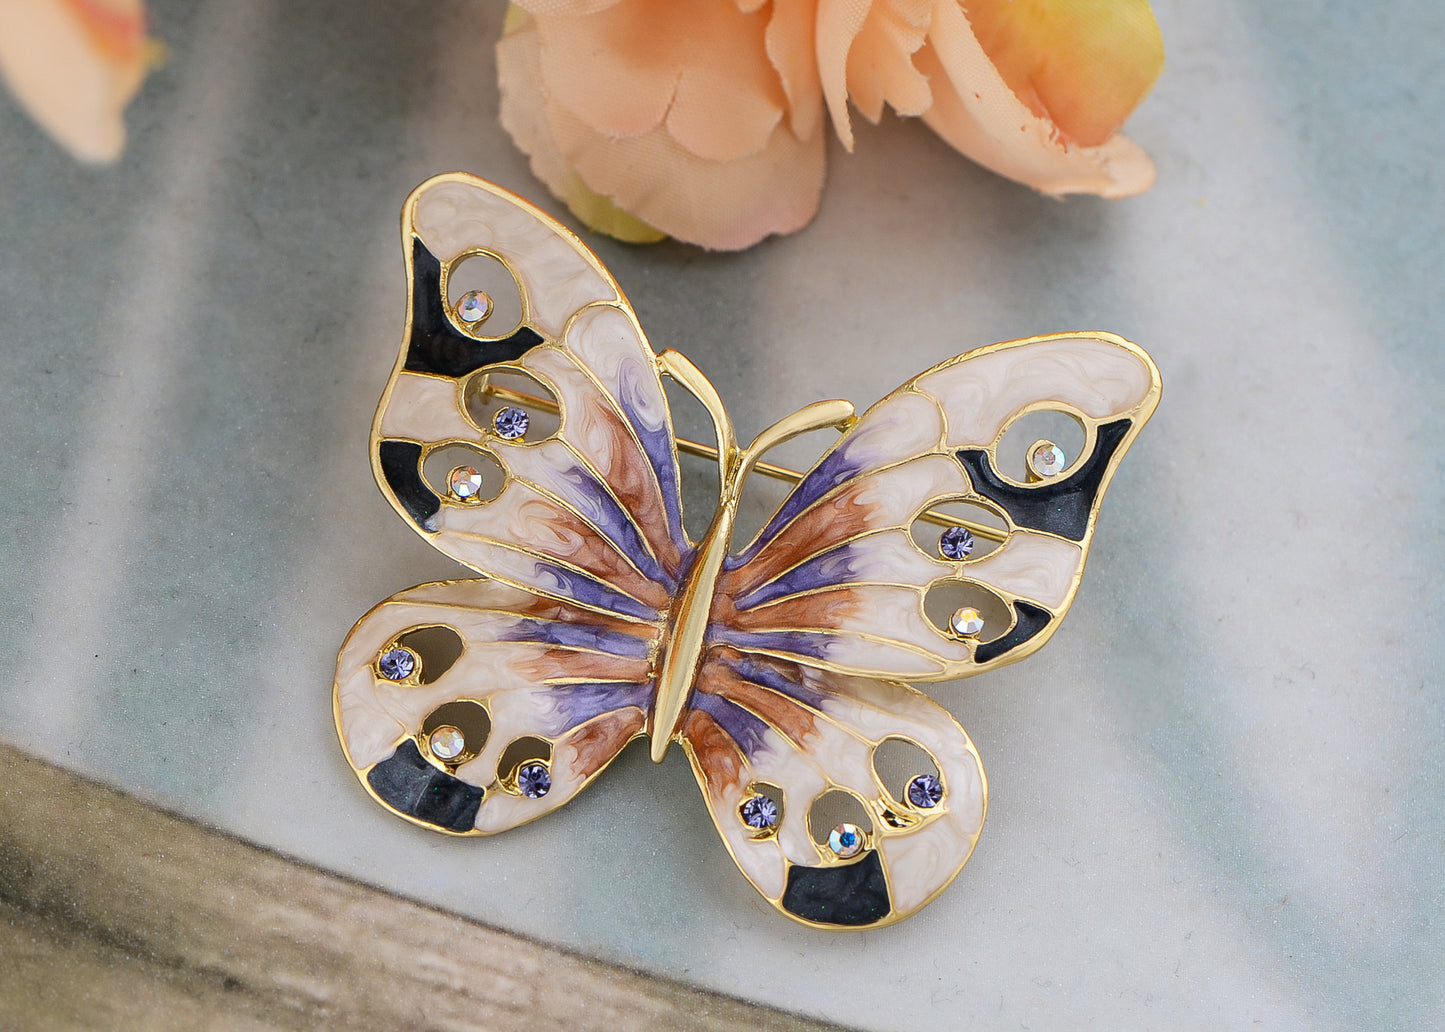 Elements Opalescent Swirl Colors Vibrant Butterfly Pin Brooch